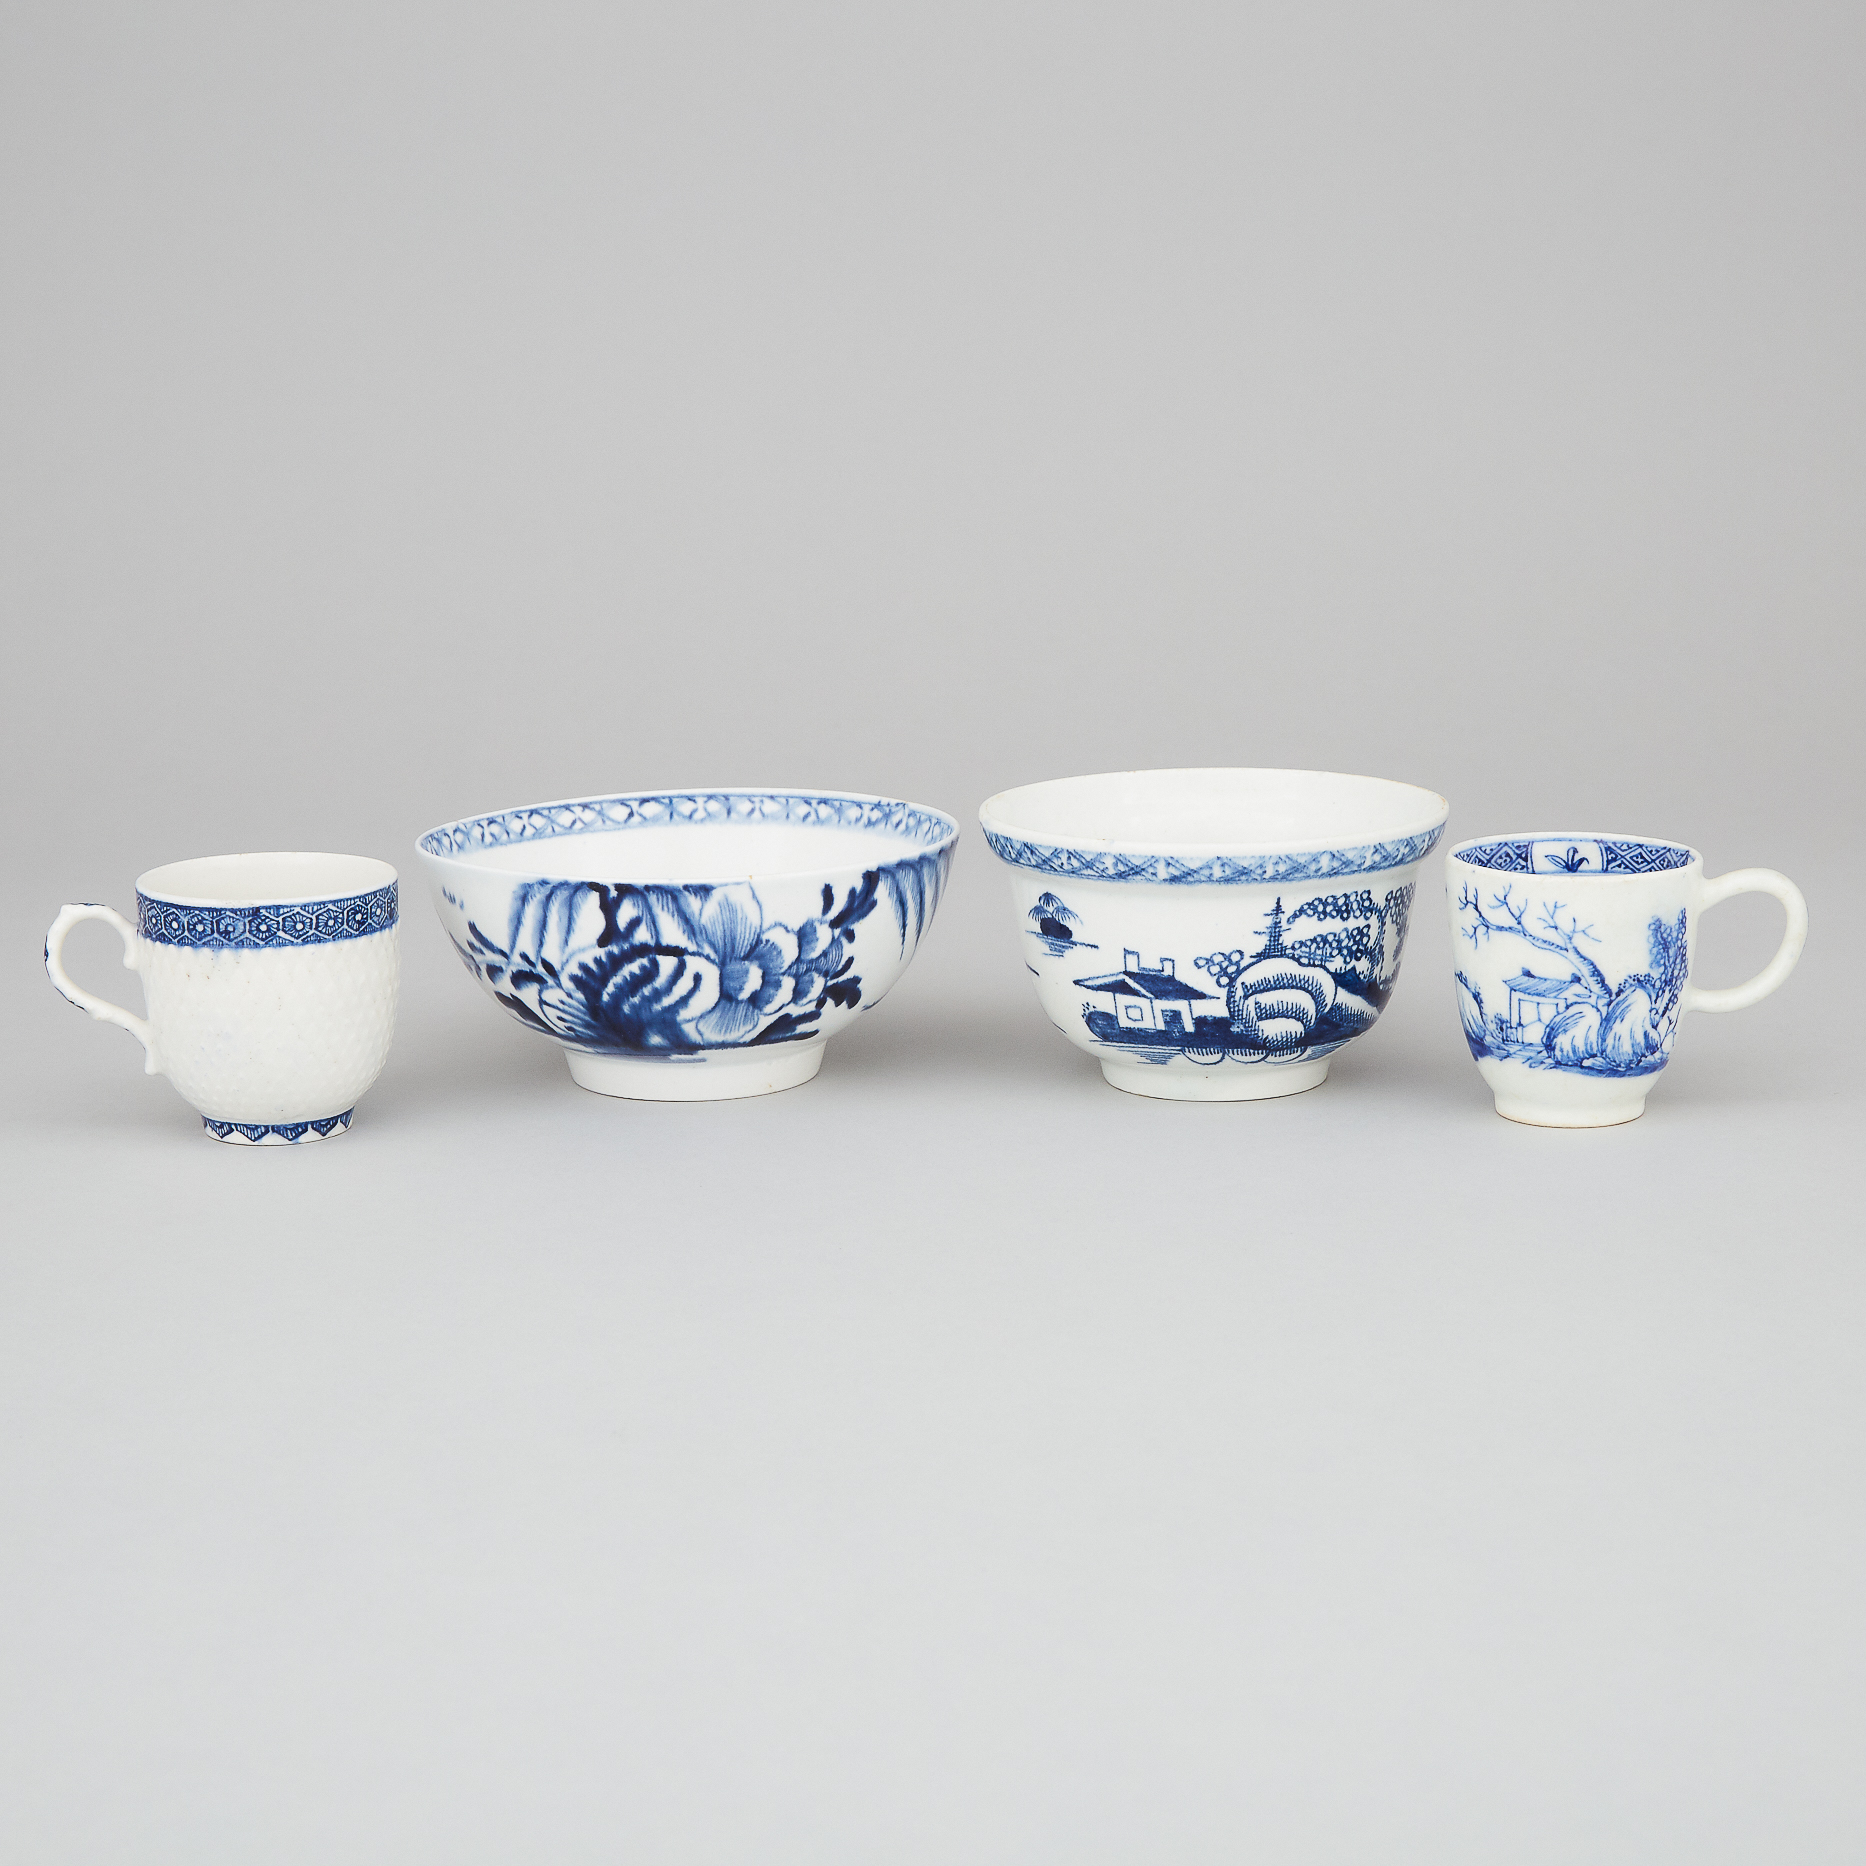 Two Bow Blue and White Cups and Two Bowls, c.1750-70